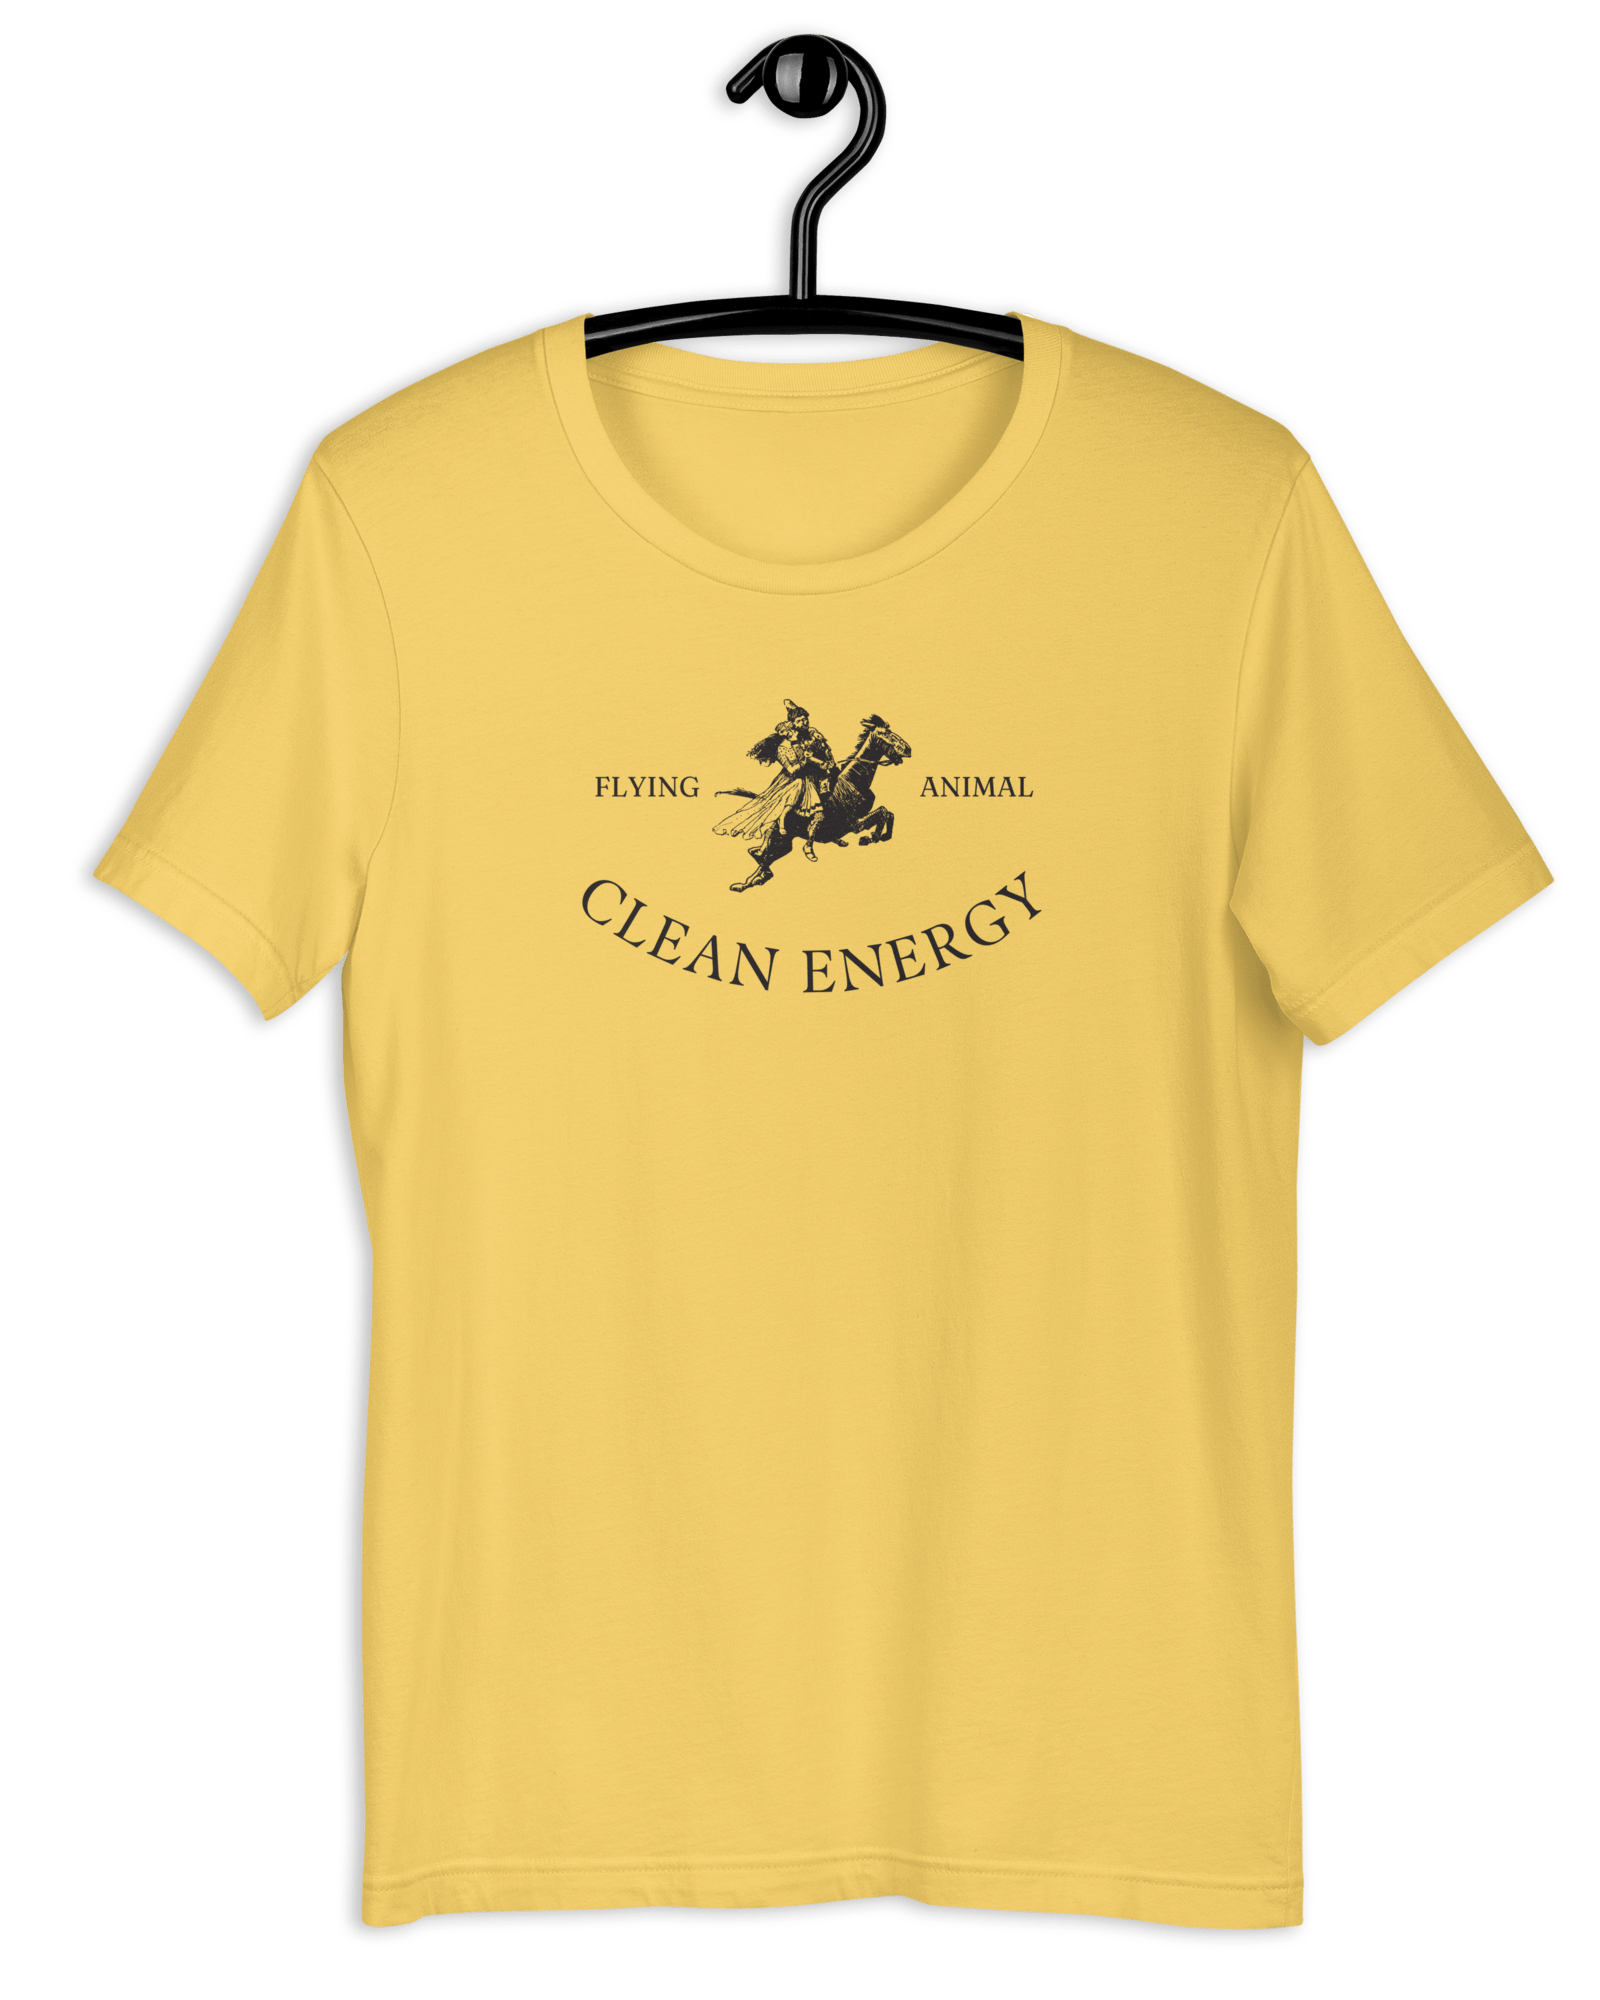 Flying Animal Clean Energy T-shirt Yellow / S Jolly & Goode